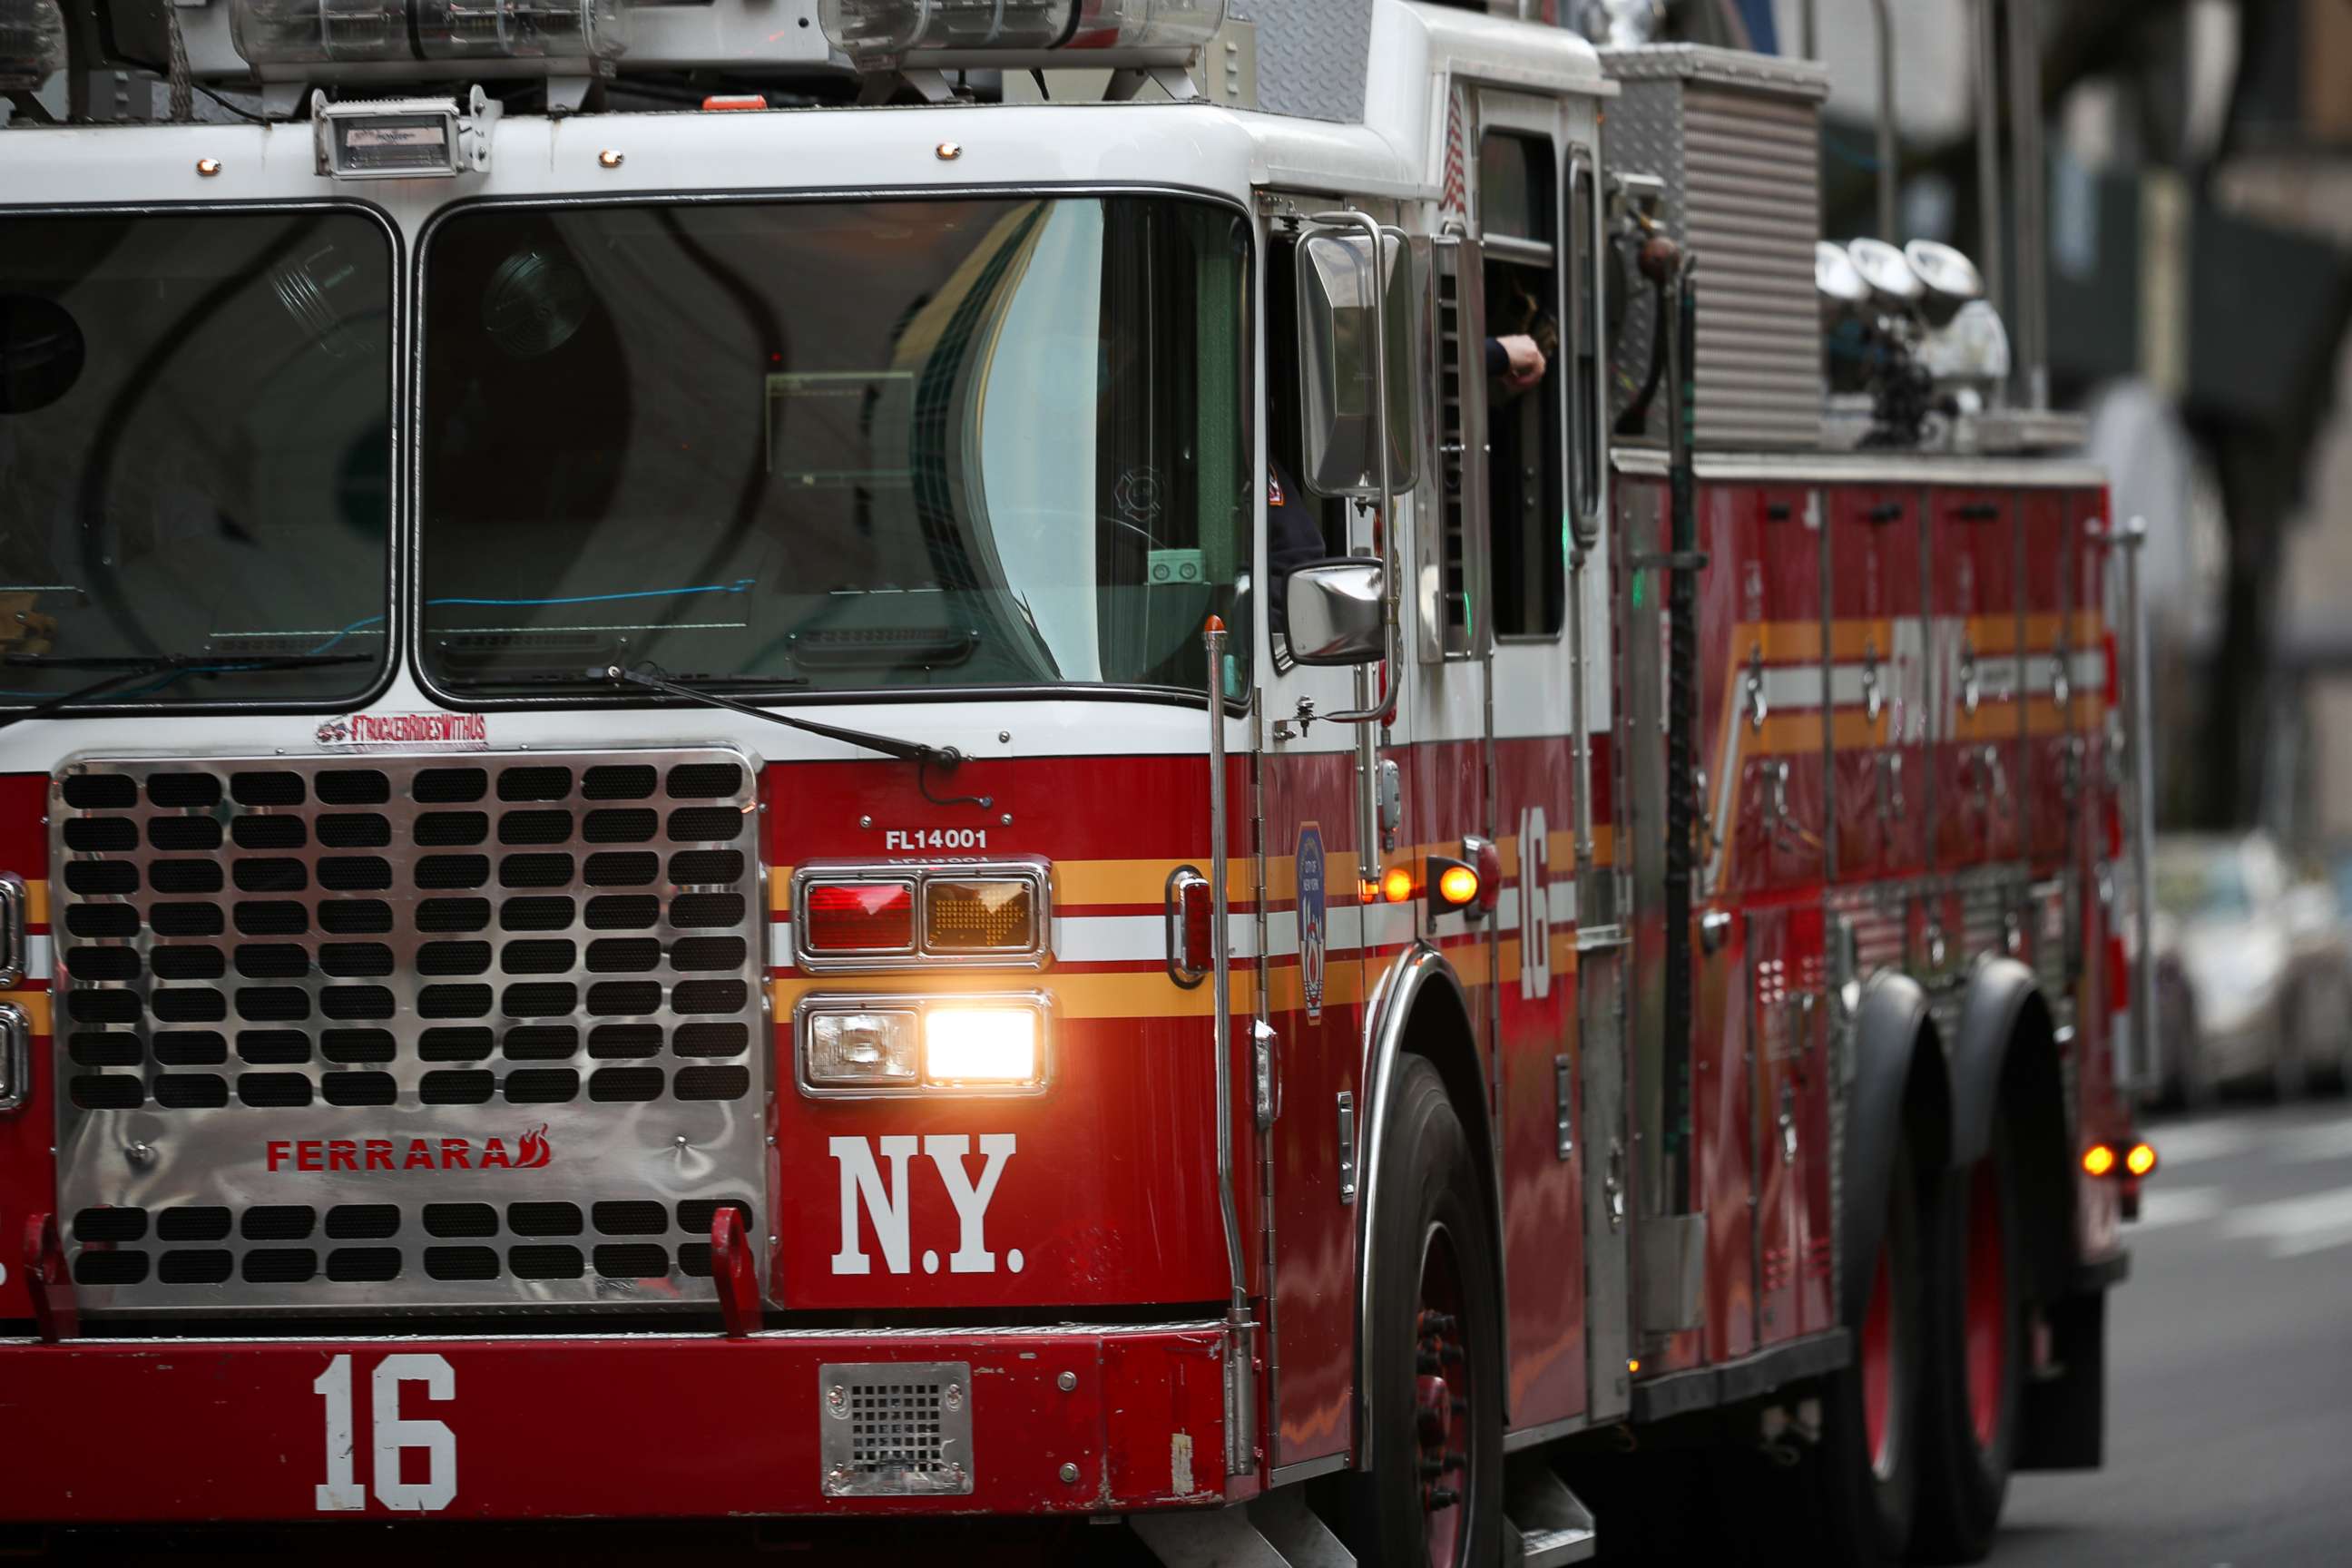 PHOTO: A fire truck is pictured in New York, April 12, 2020.